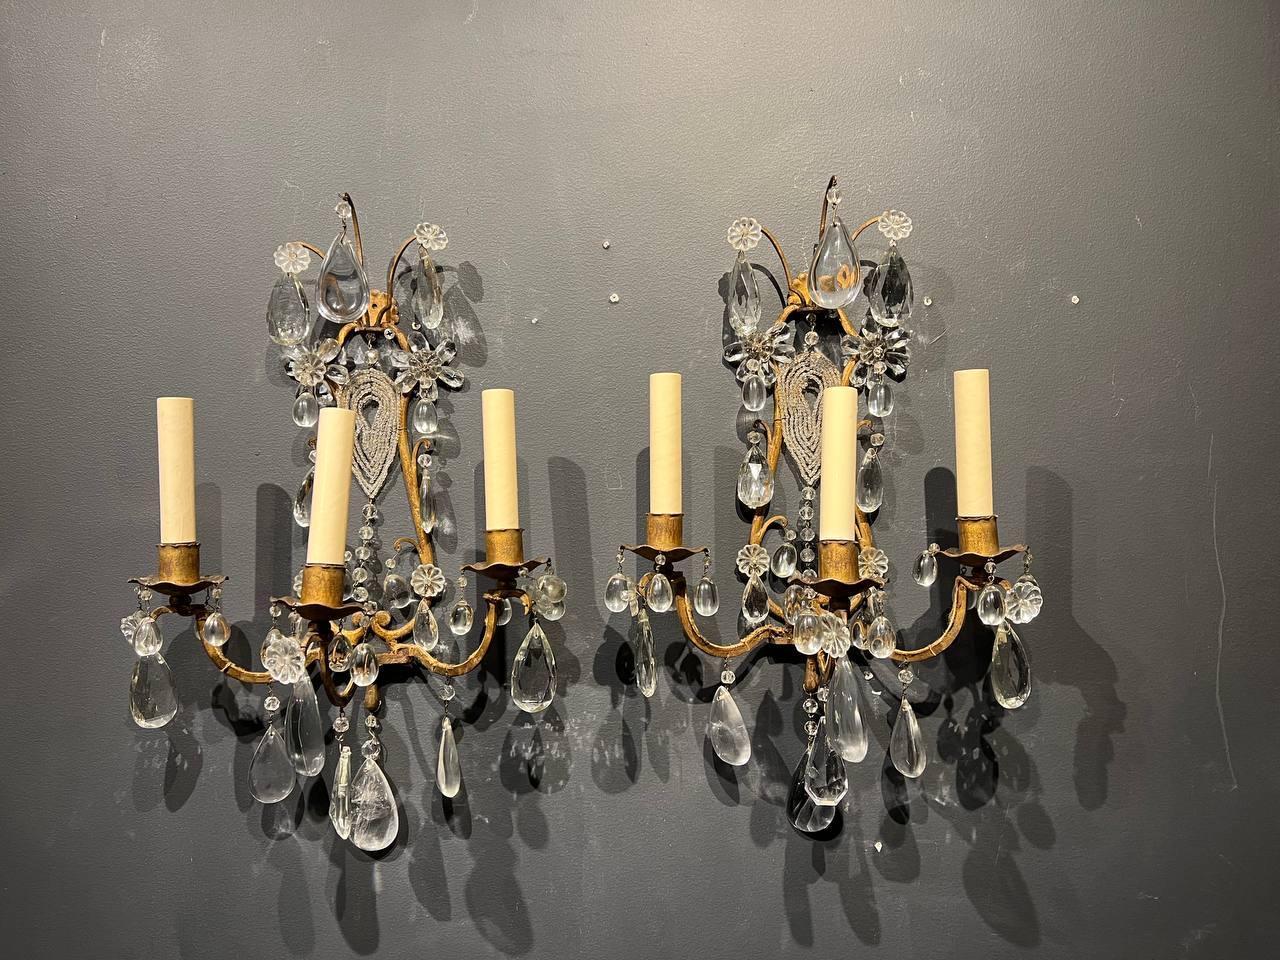 French Provincial 1930's French Bagues Sconces with 3 Lights For Sale